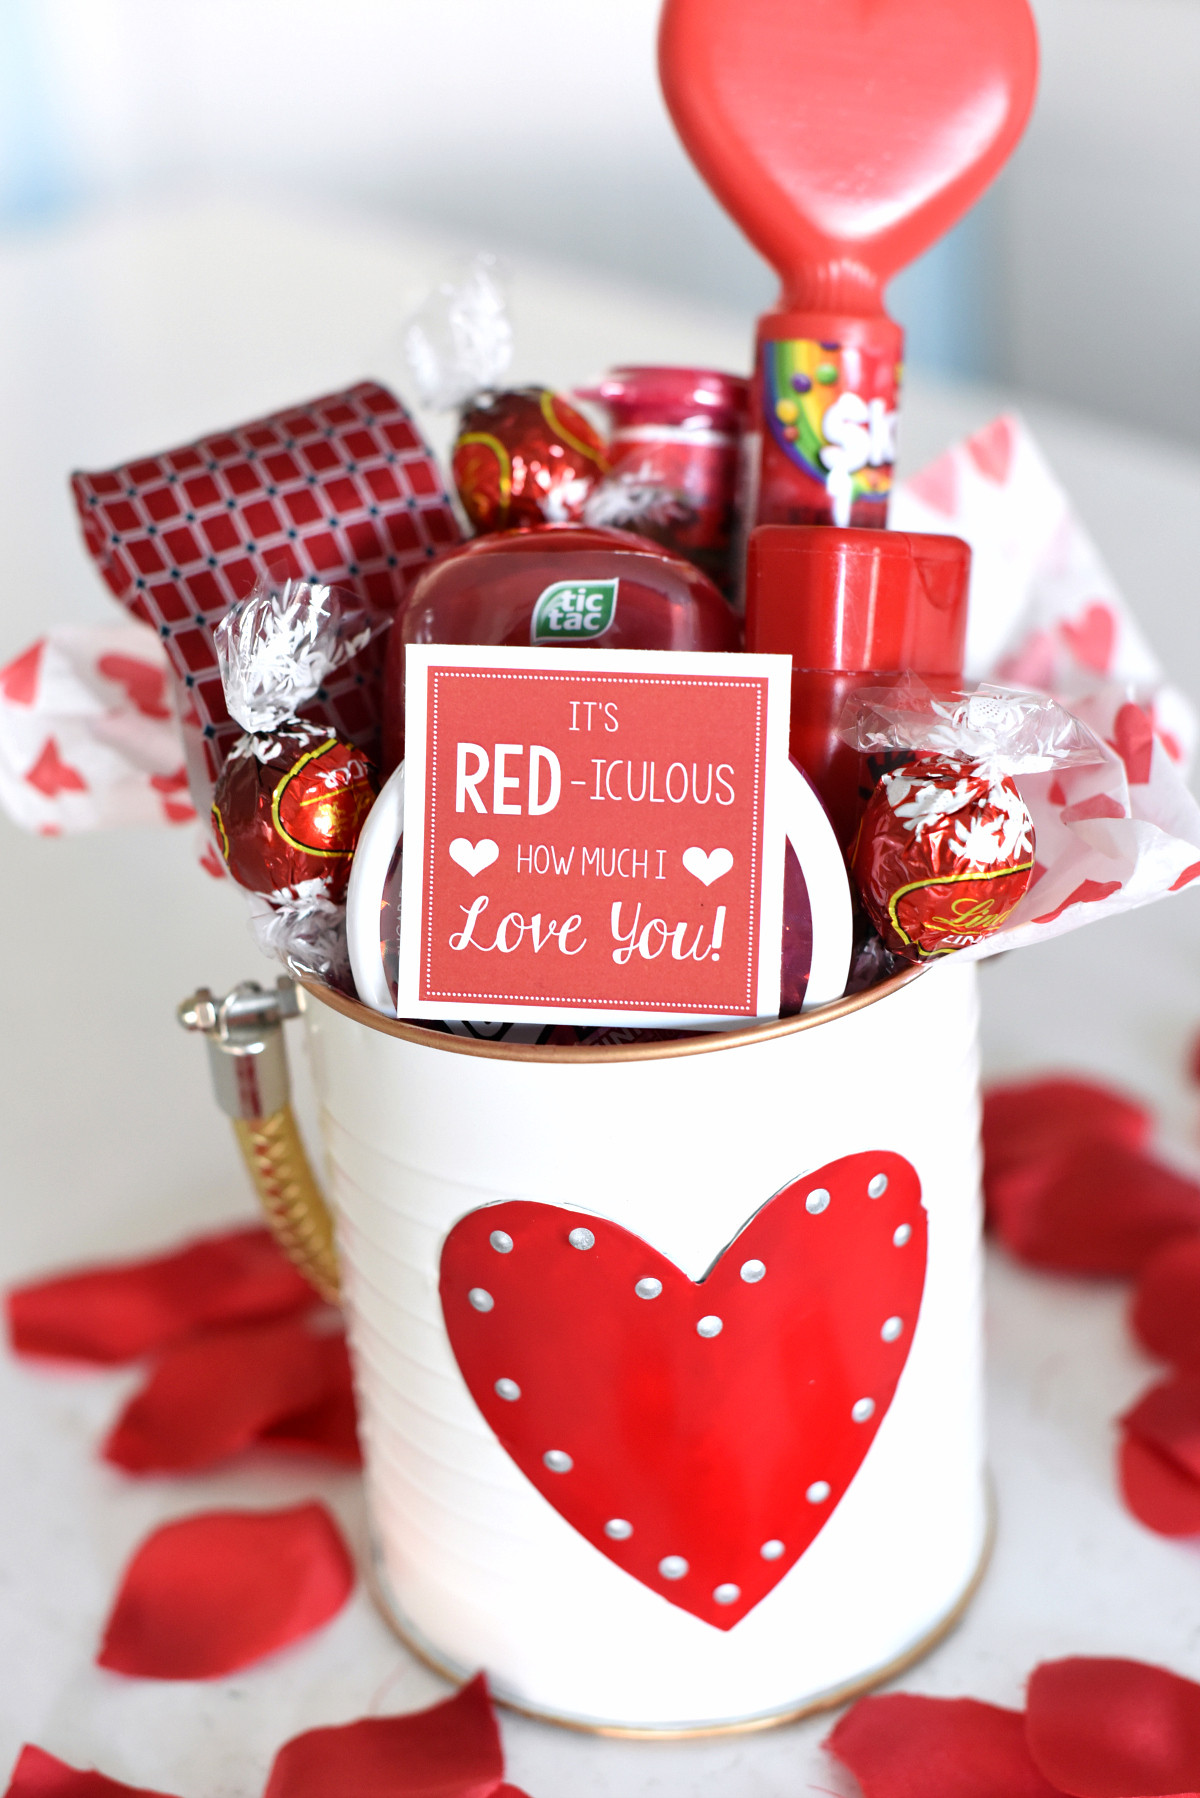 Will You Be My Valentine Gift Ideas
 Cute Valentine s Day Gift Idea RED iculous Basket